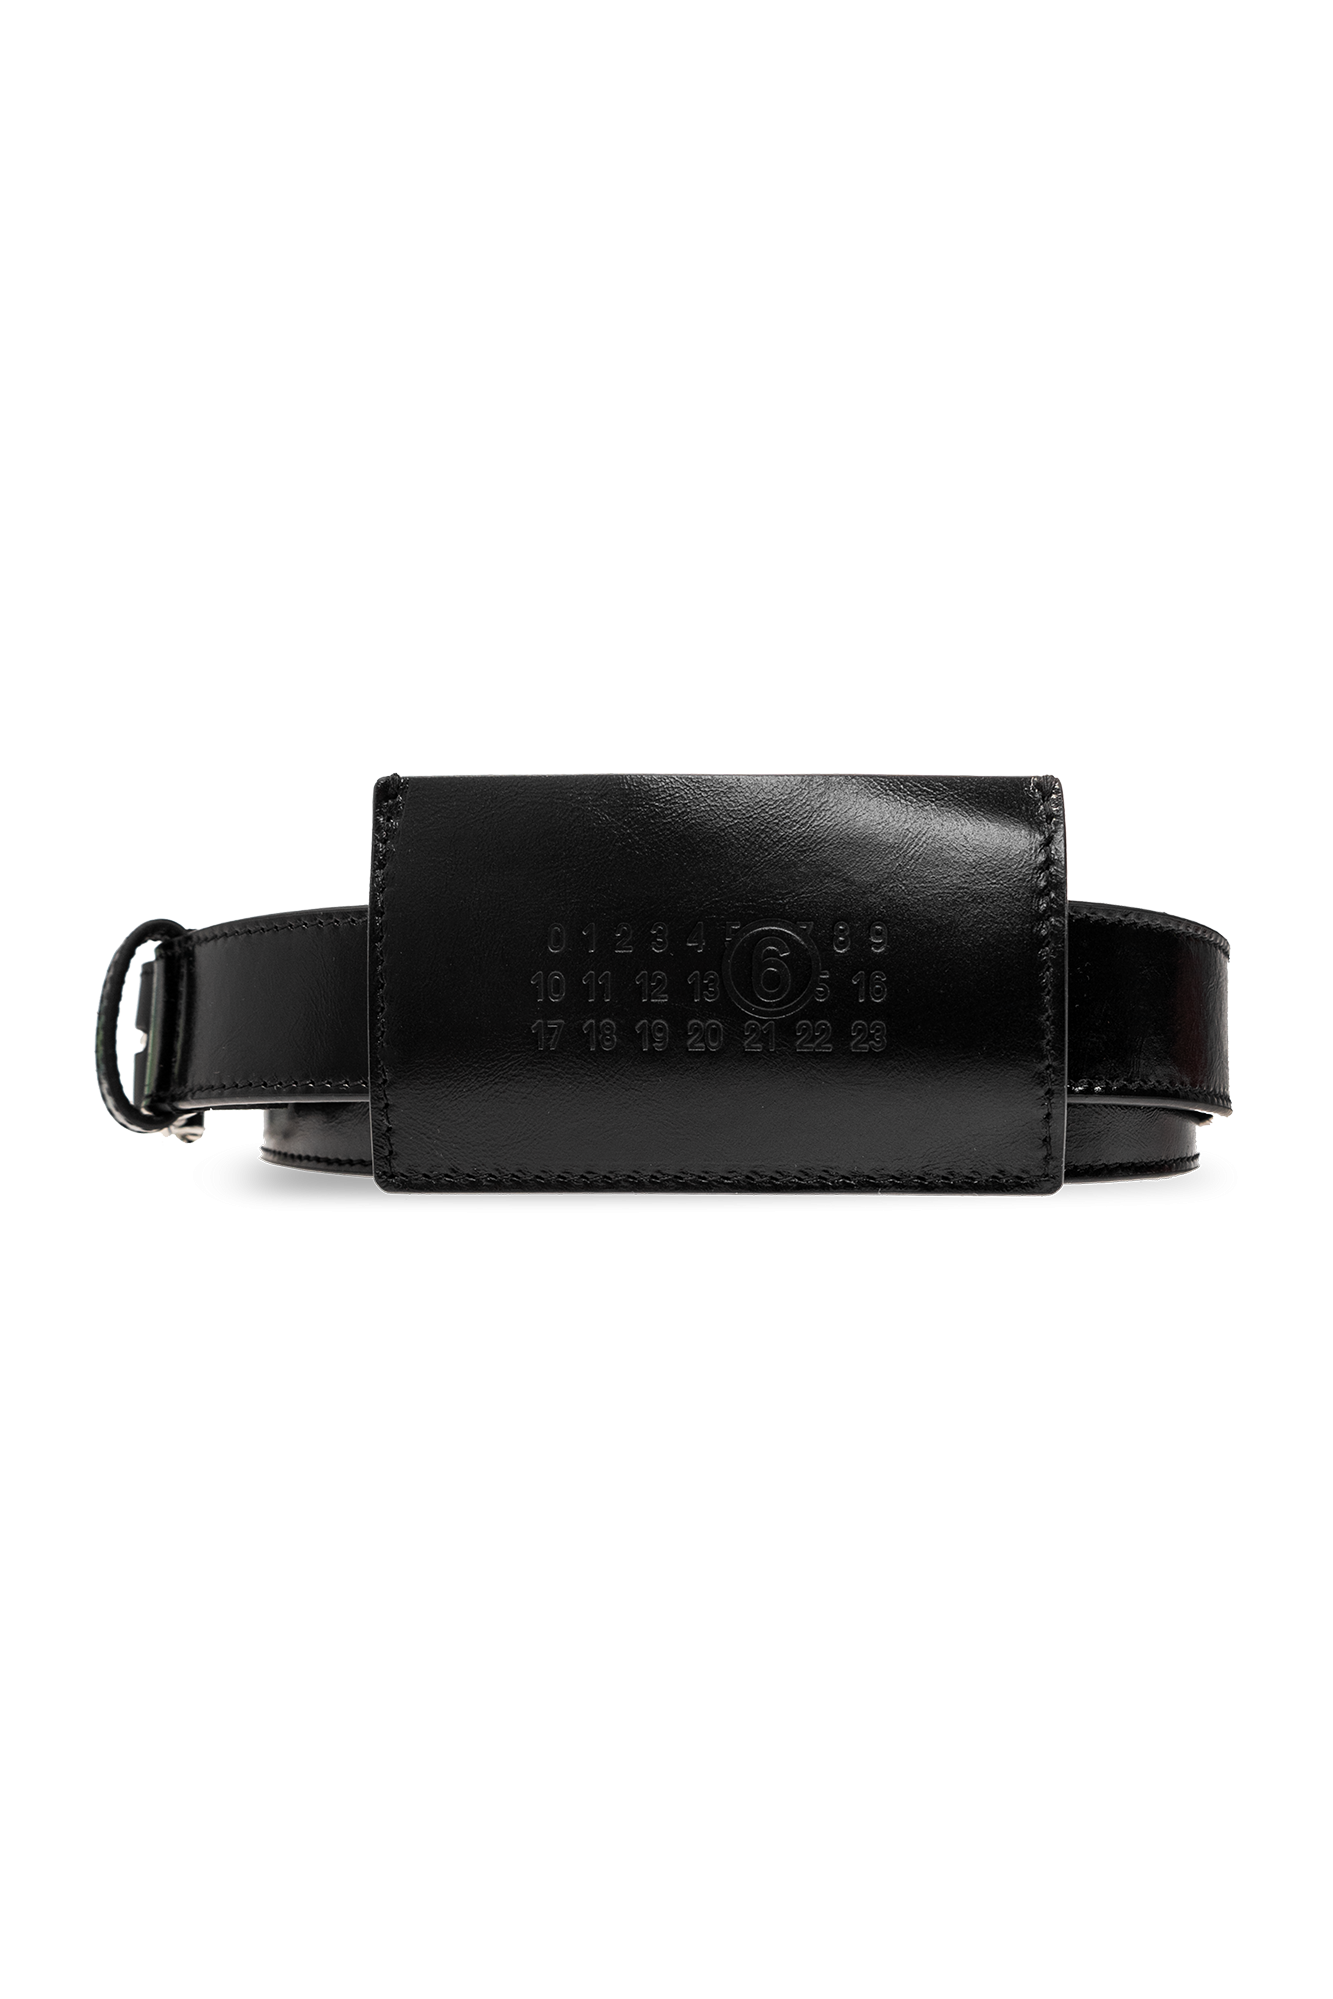 MM6 Maison Margiela Leather belt with card holder | Women's Accessories ...